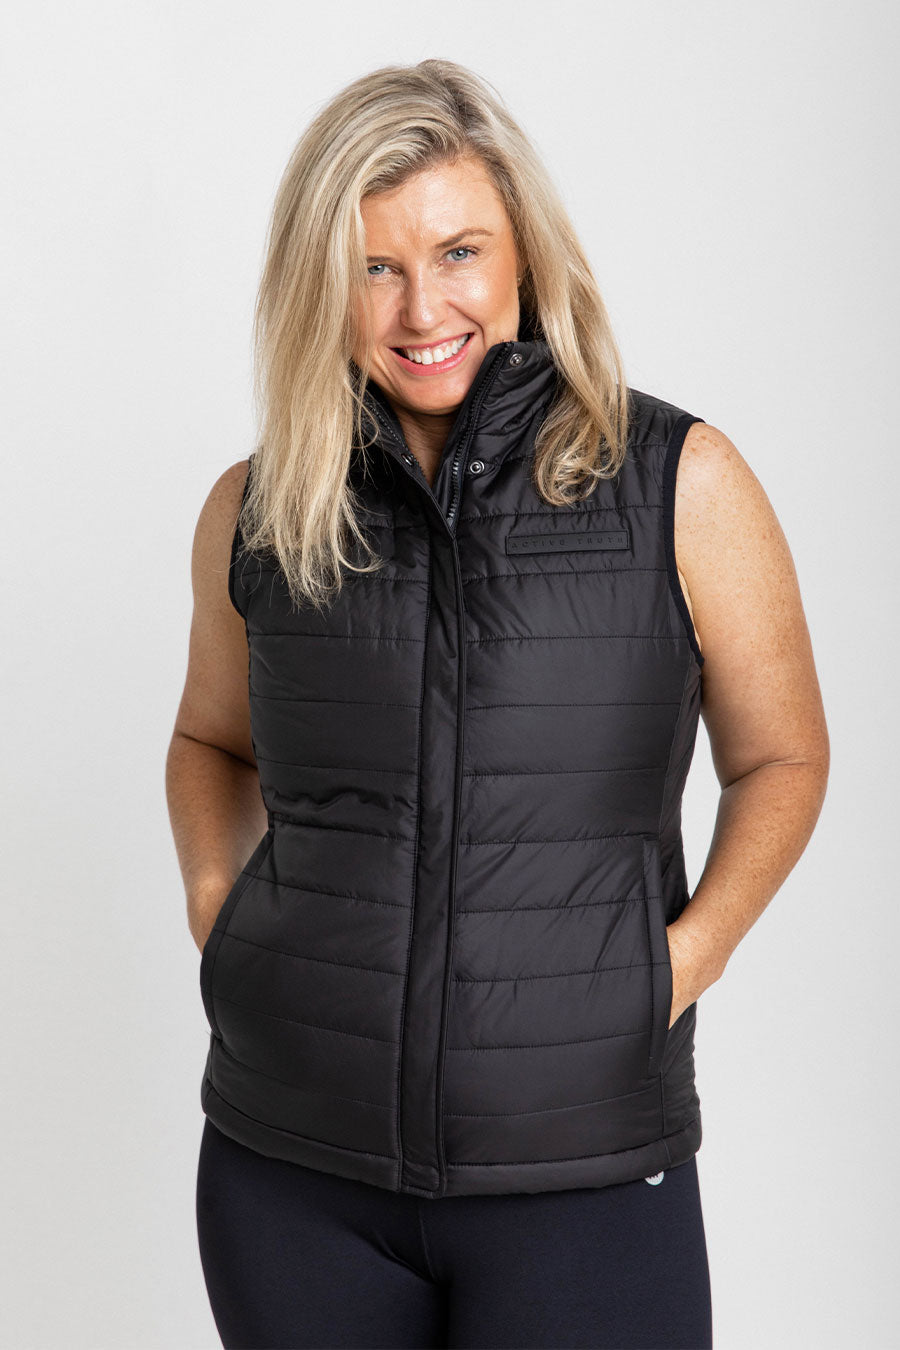 Lifestyle Puffa Vest - Black from Active Truth™
